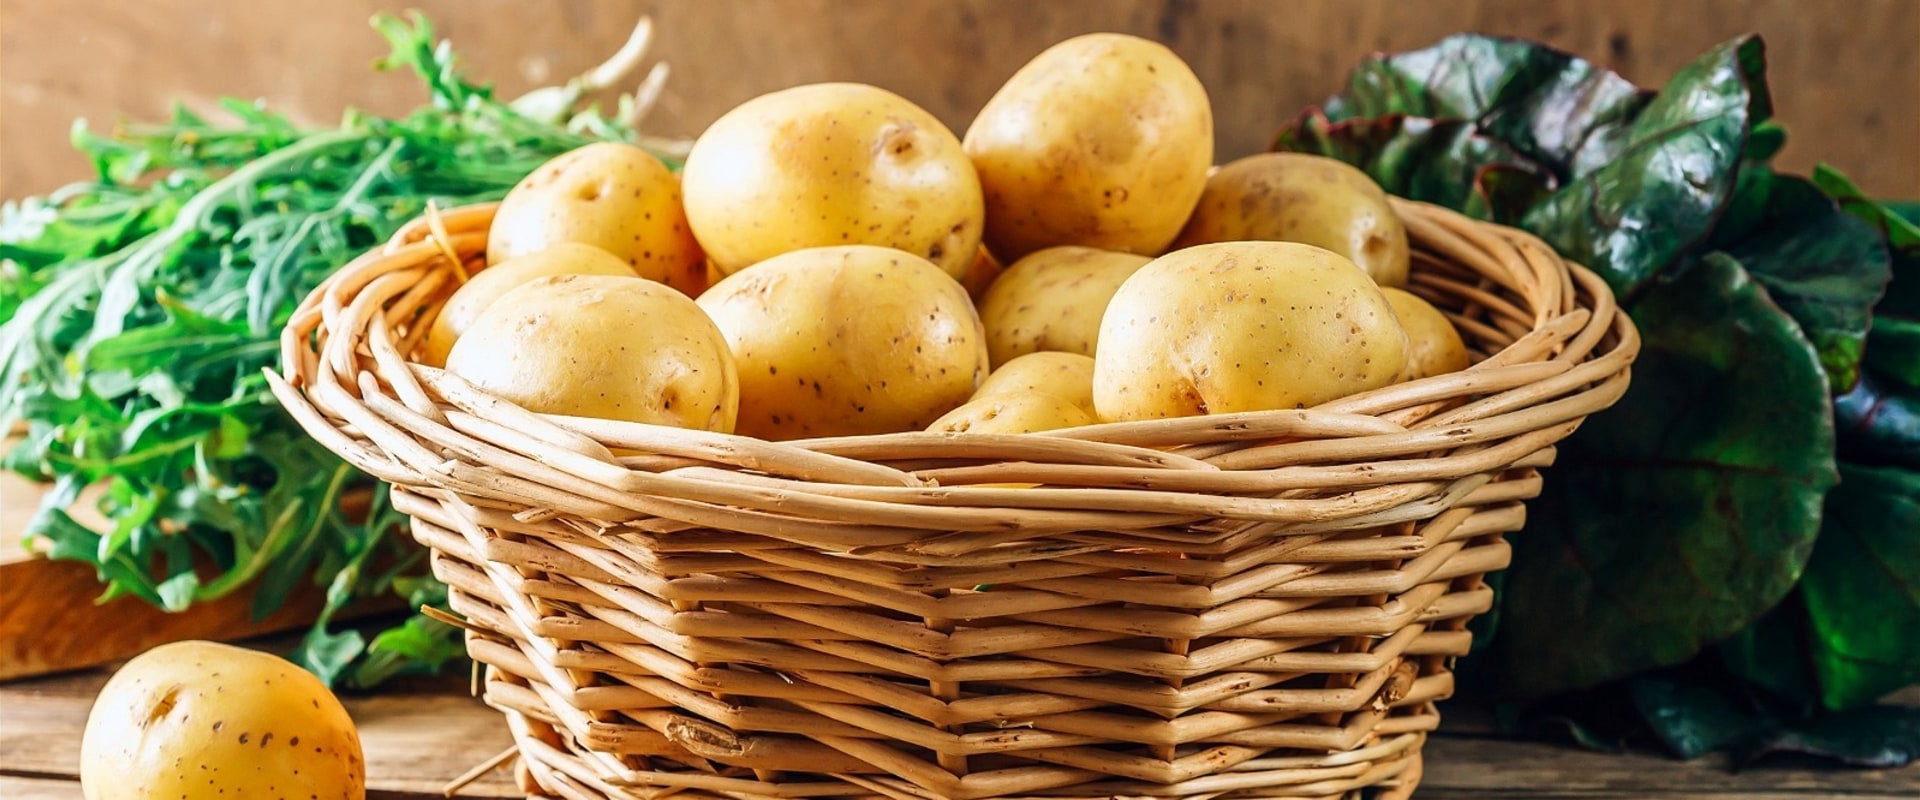 Can i eat potatoes on a paleo diet?